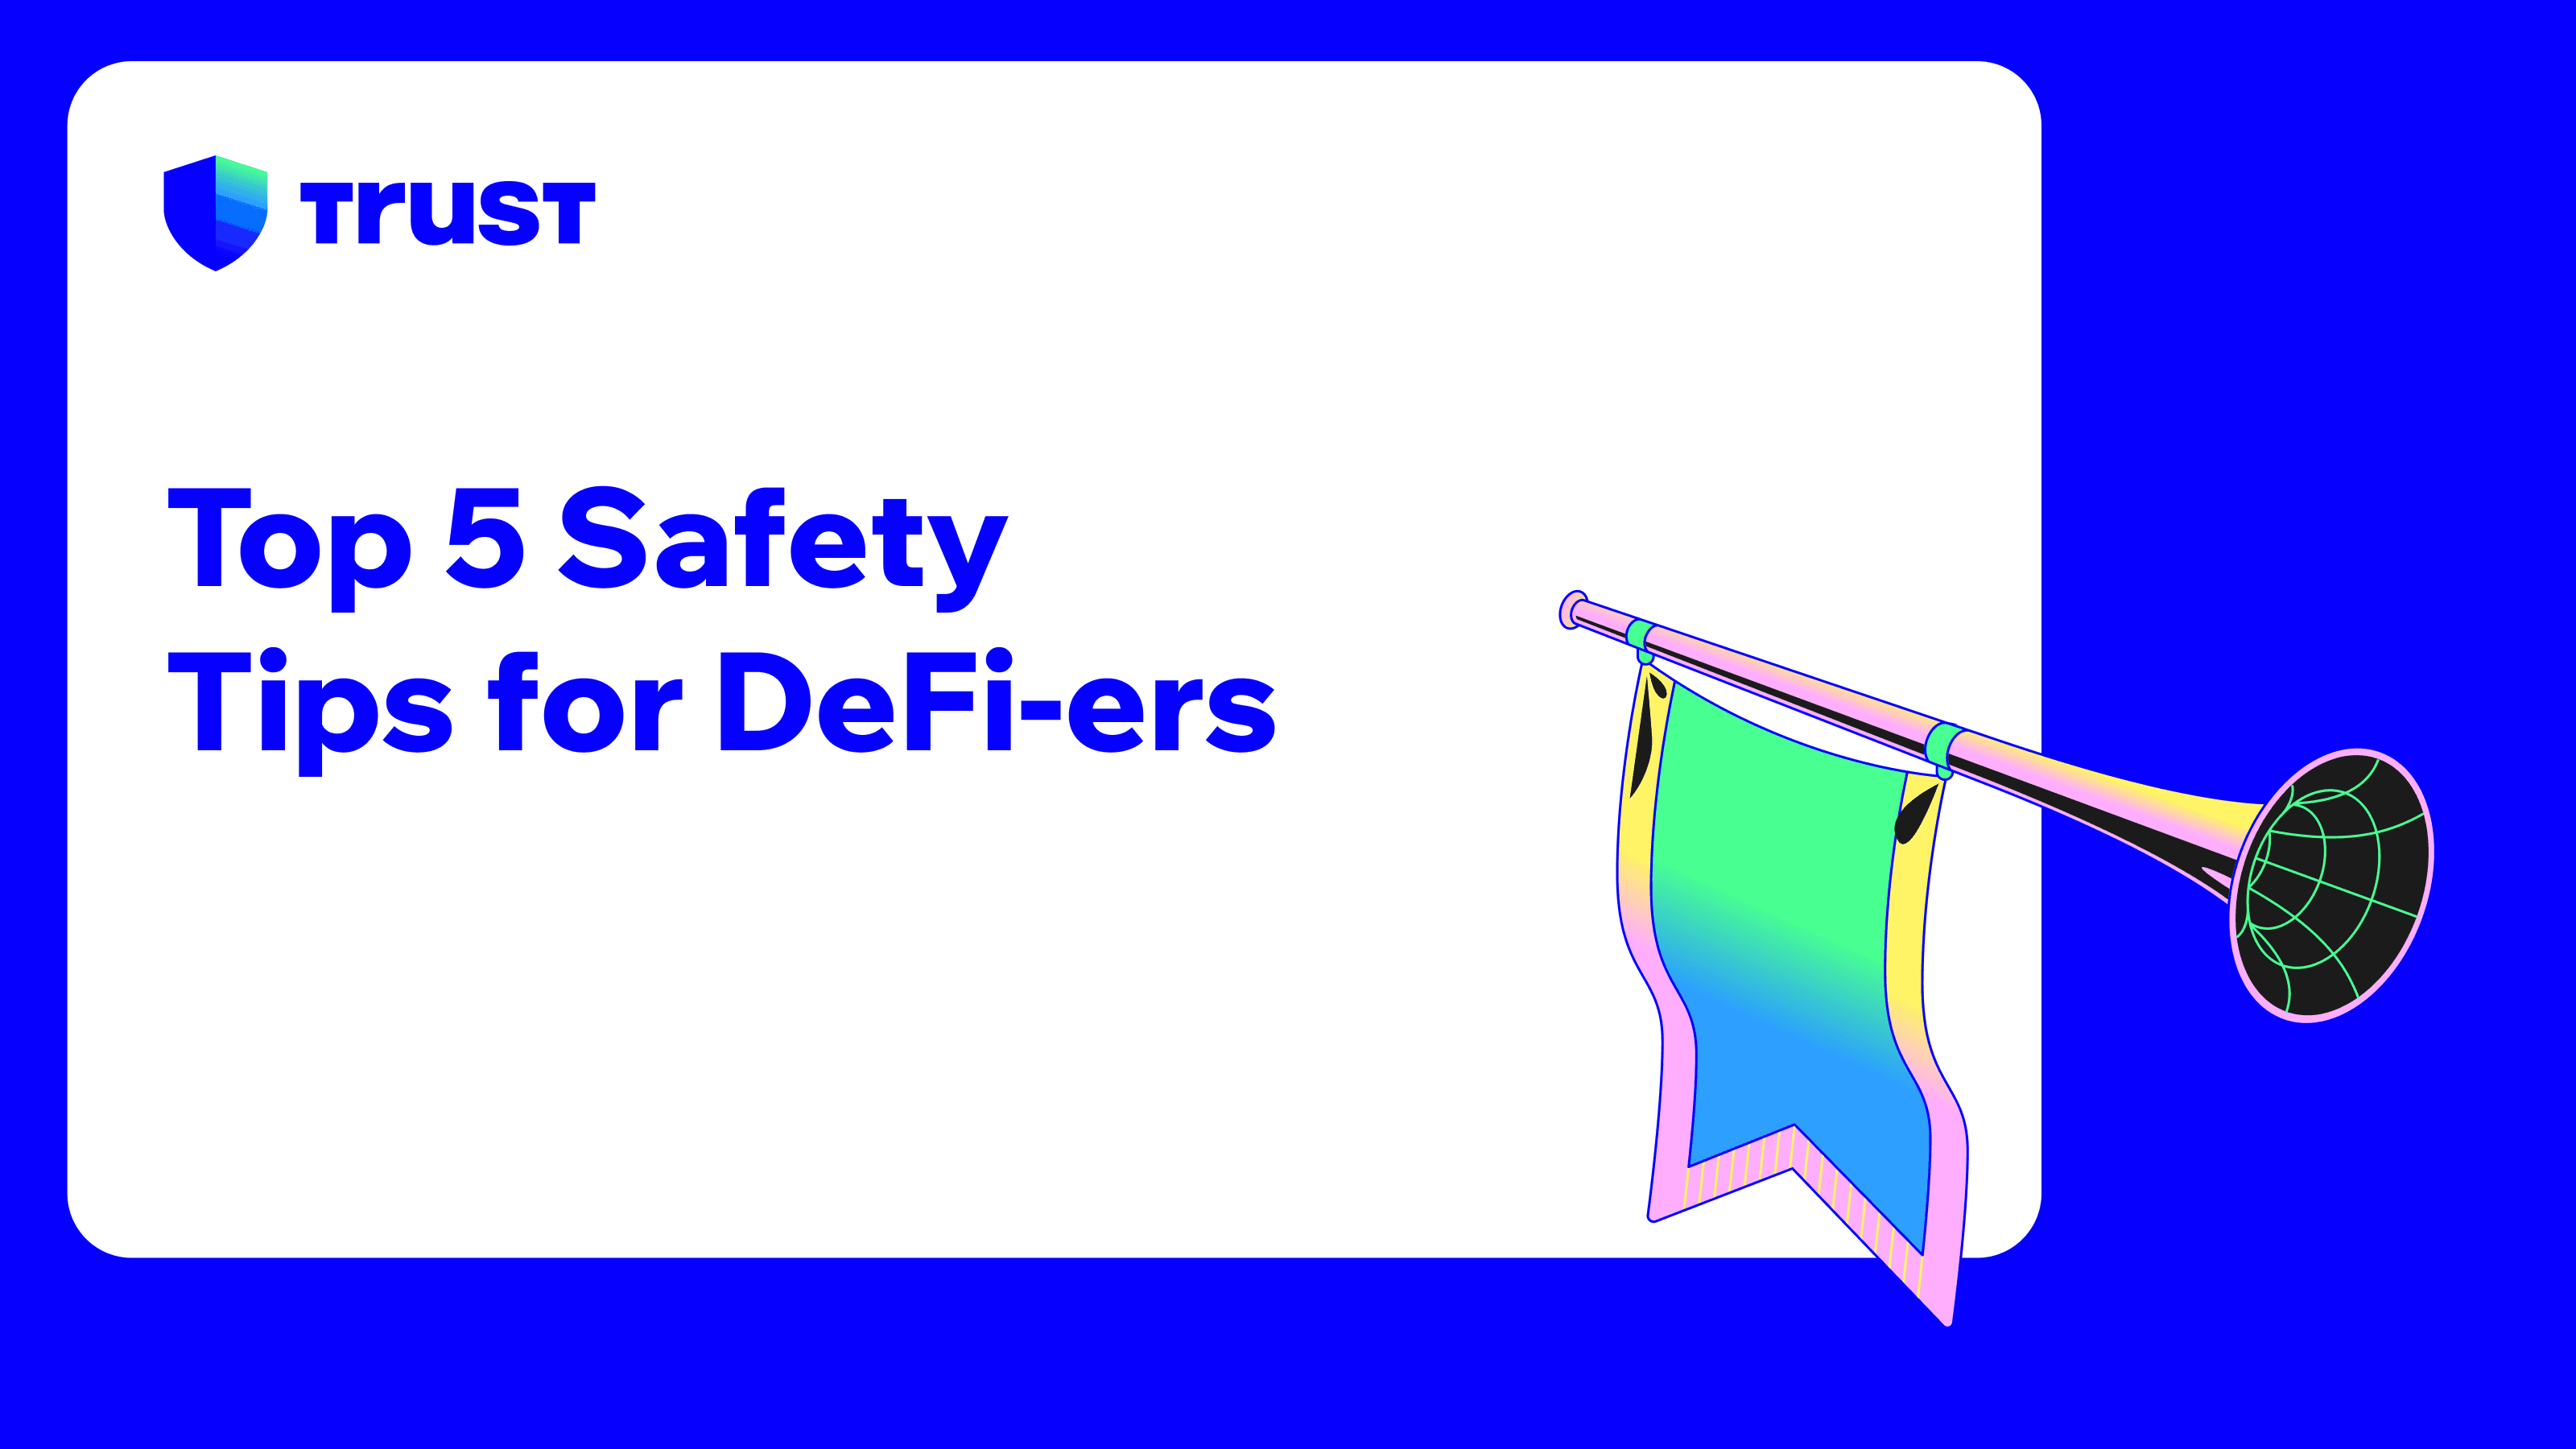 Top 5 Safety Tips for DeFi-ers